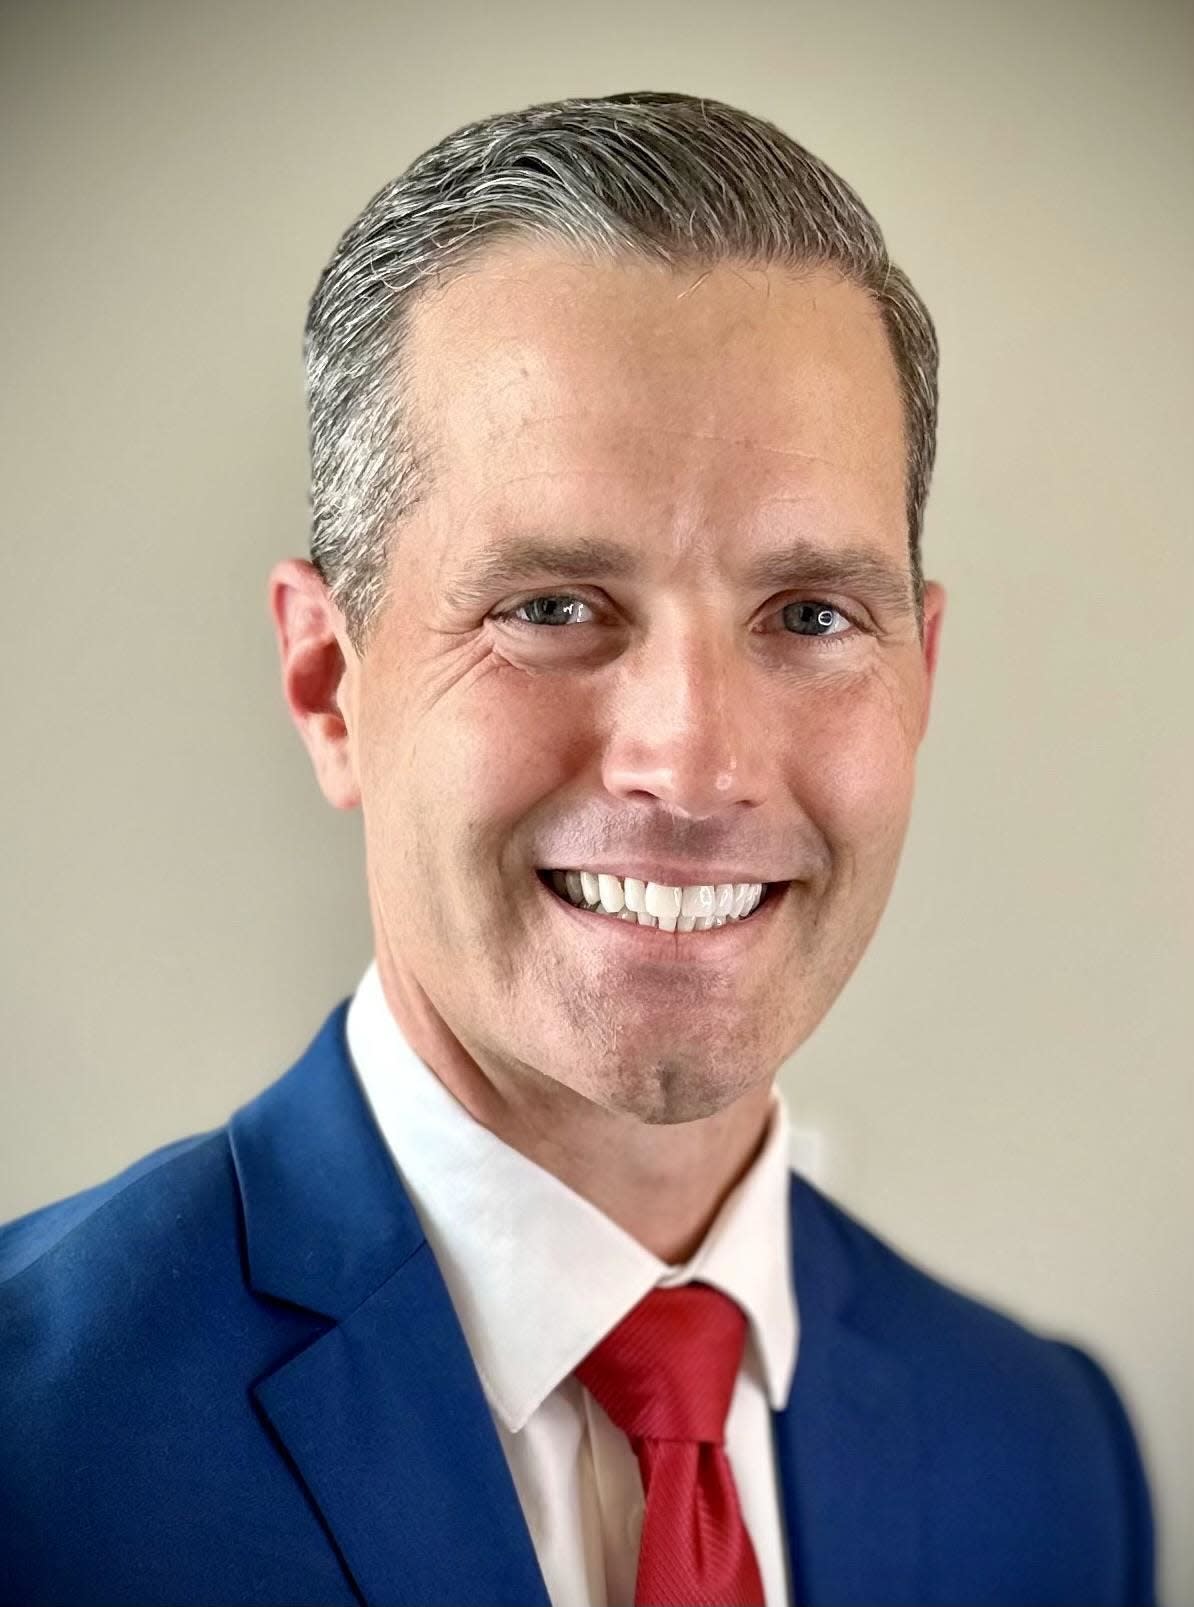 Portrait of Terrence Connor, a deputy superintendent and chief academic officer for Hillsborough County Public Schools. The Sarasota School Board ranked Connor as the top choice for its next superintendent in a preliminary ranking before interviews.